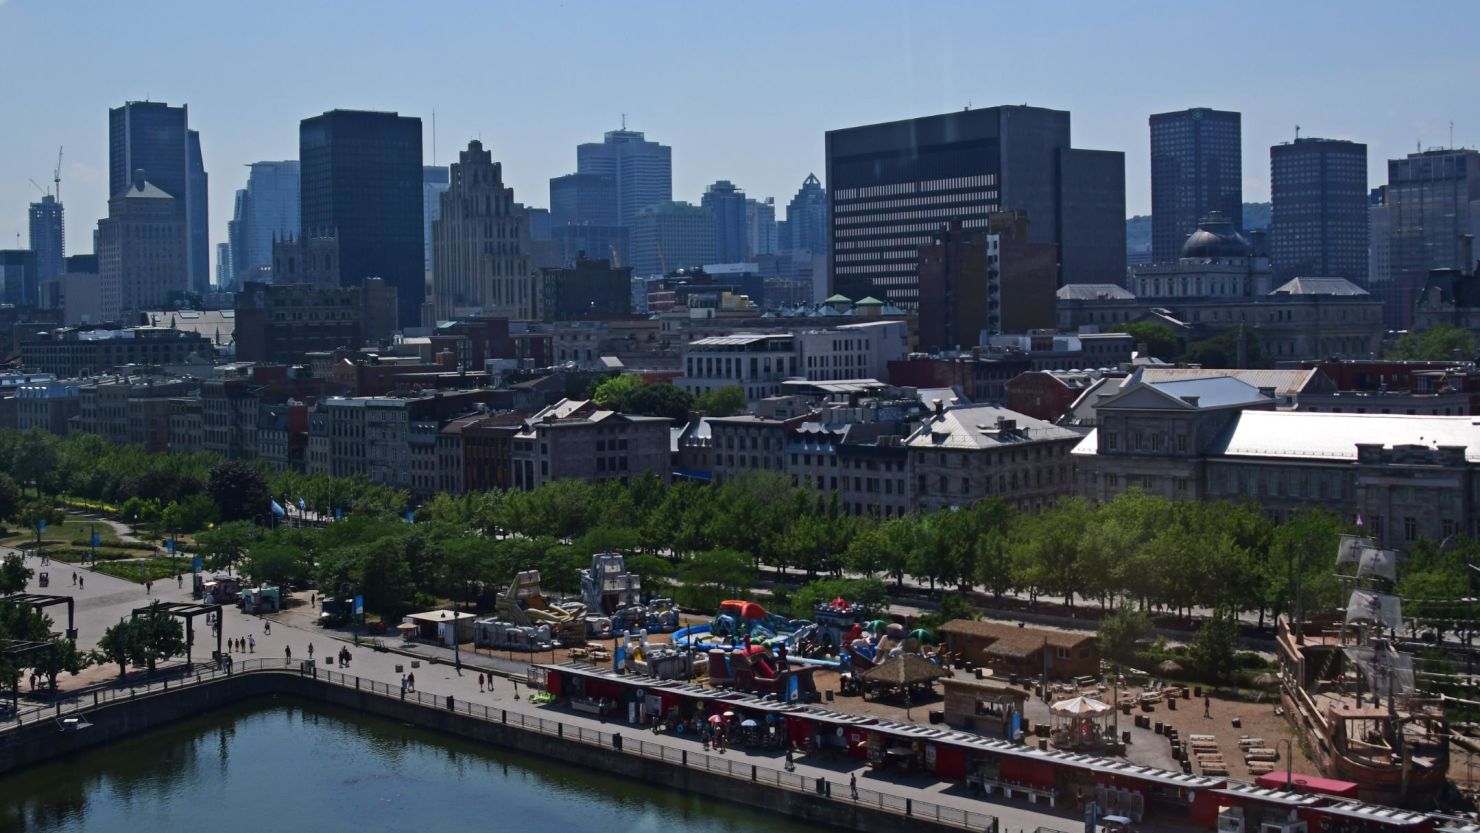 The Montreal skyline as seen from the city's Old Port, which will host an equestrian event in 2019.